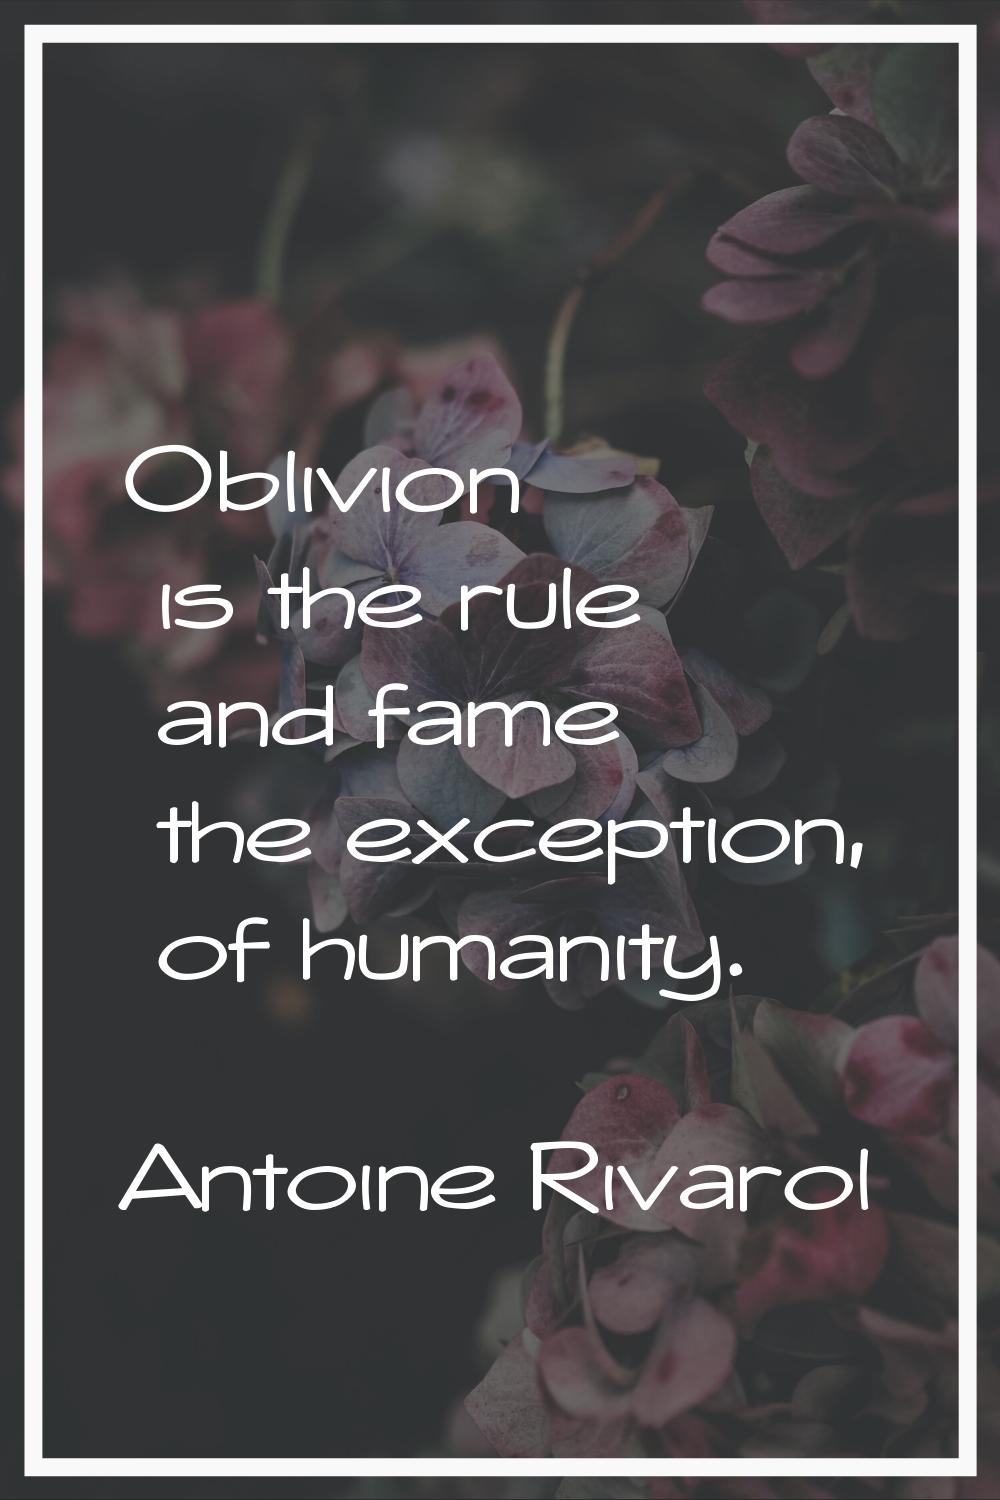 Oblivion is the rule and fame the exception, of humanity.